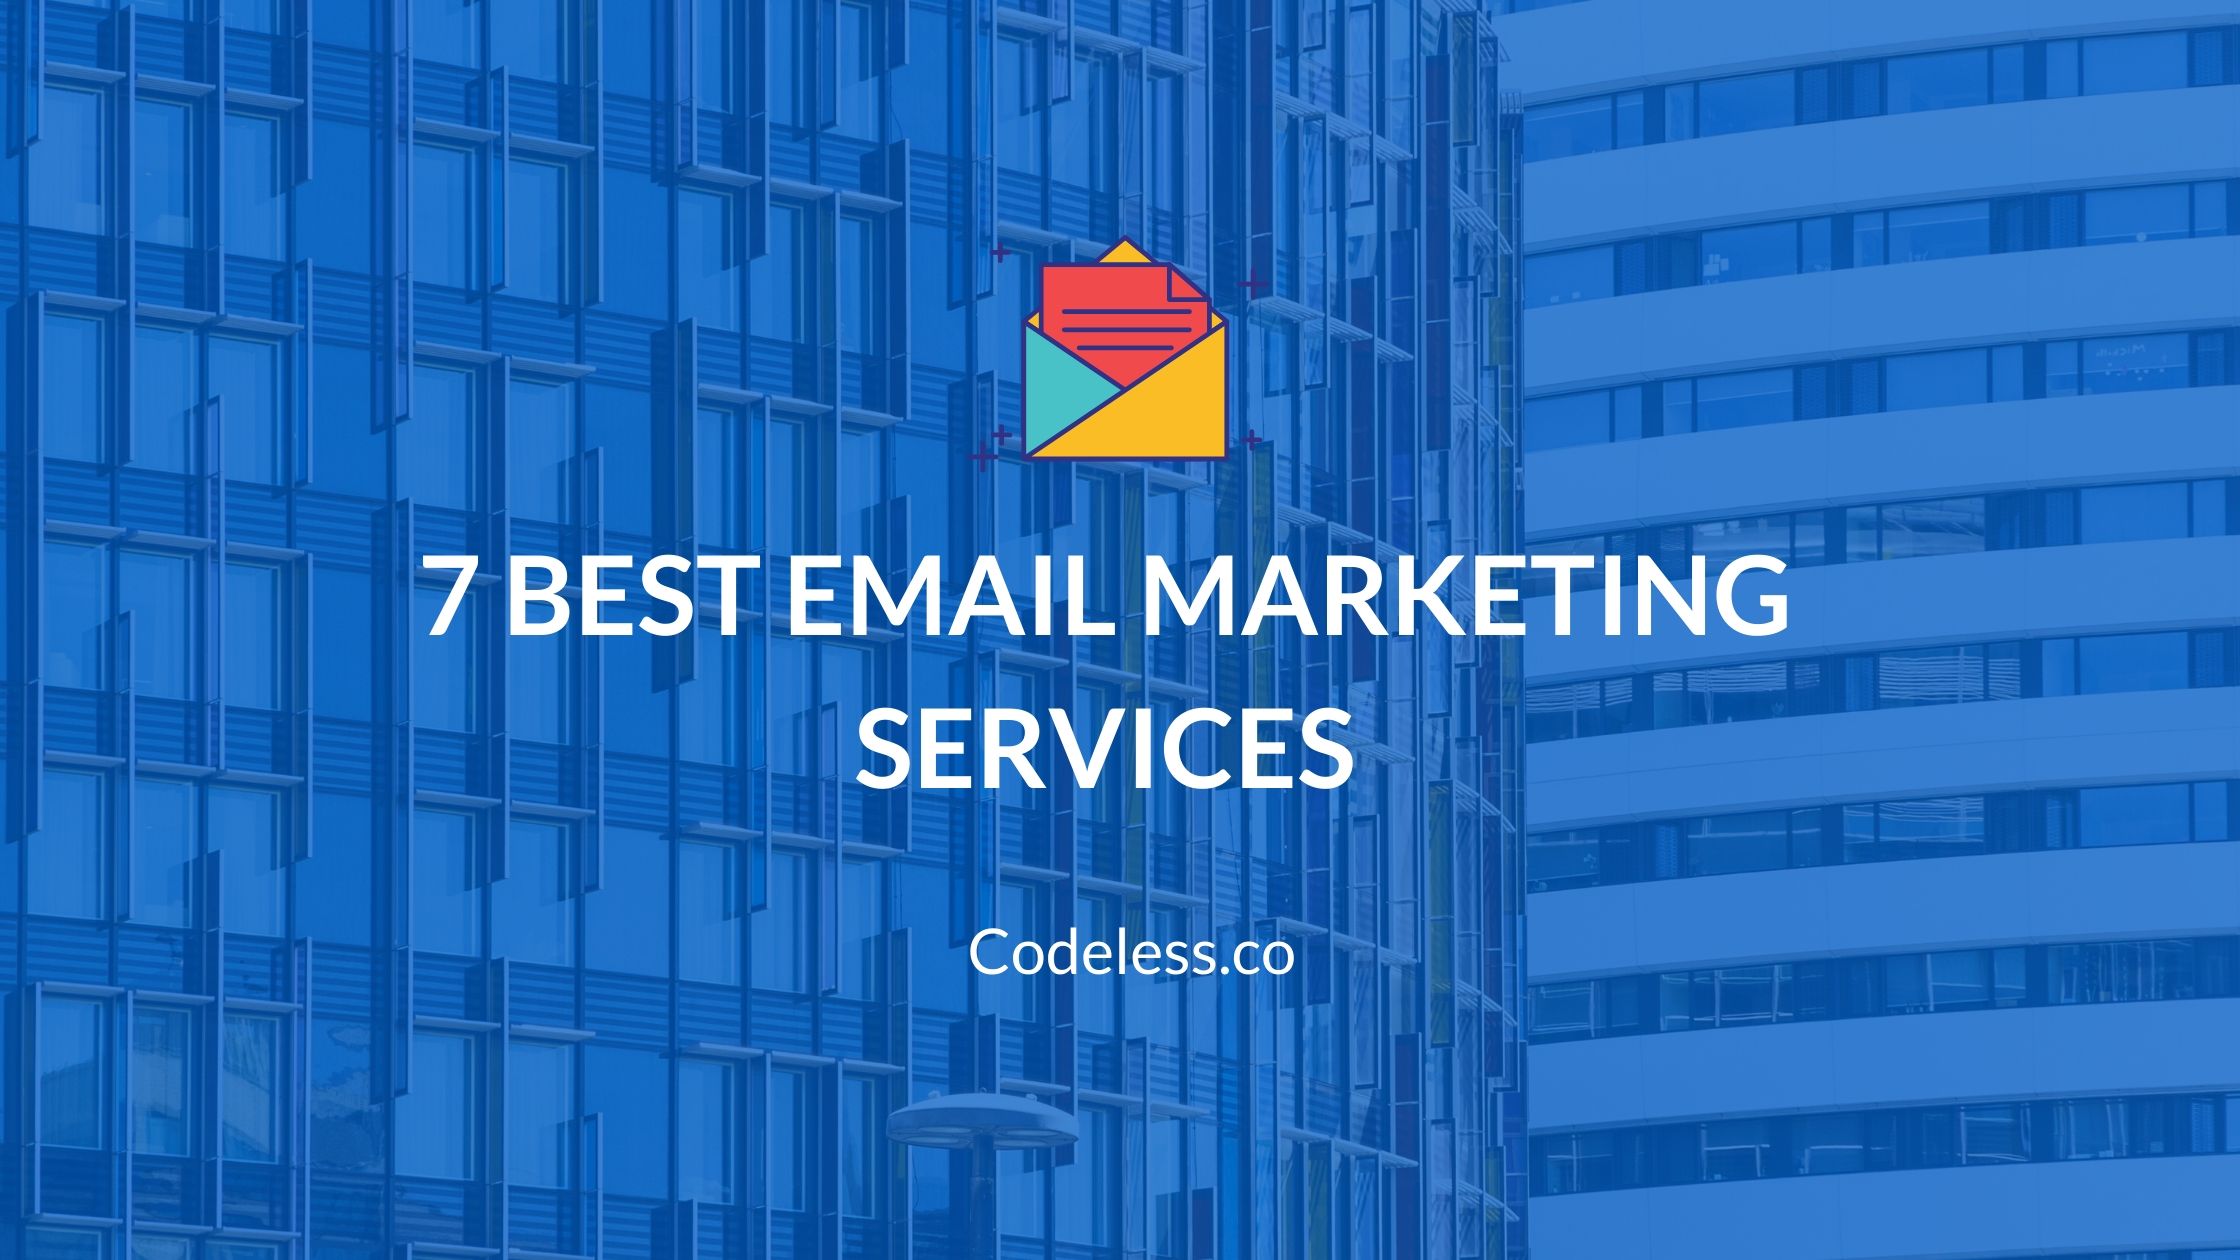 17 Best Email Marketing Services for 2022 (Ranks & Reviews)